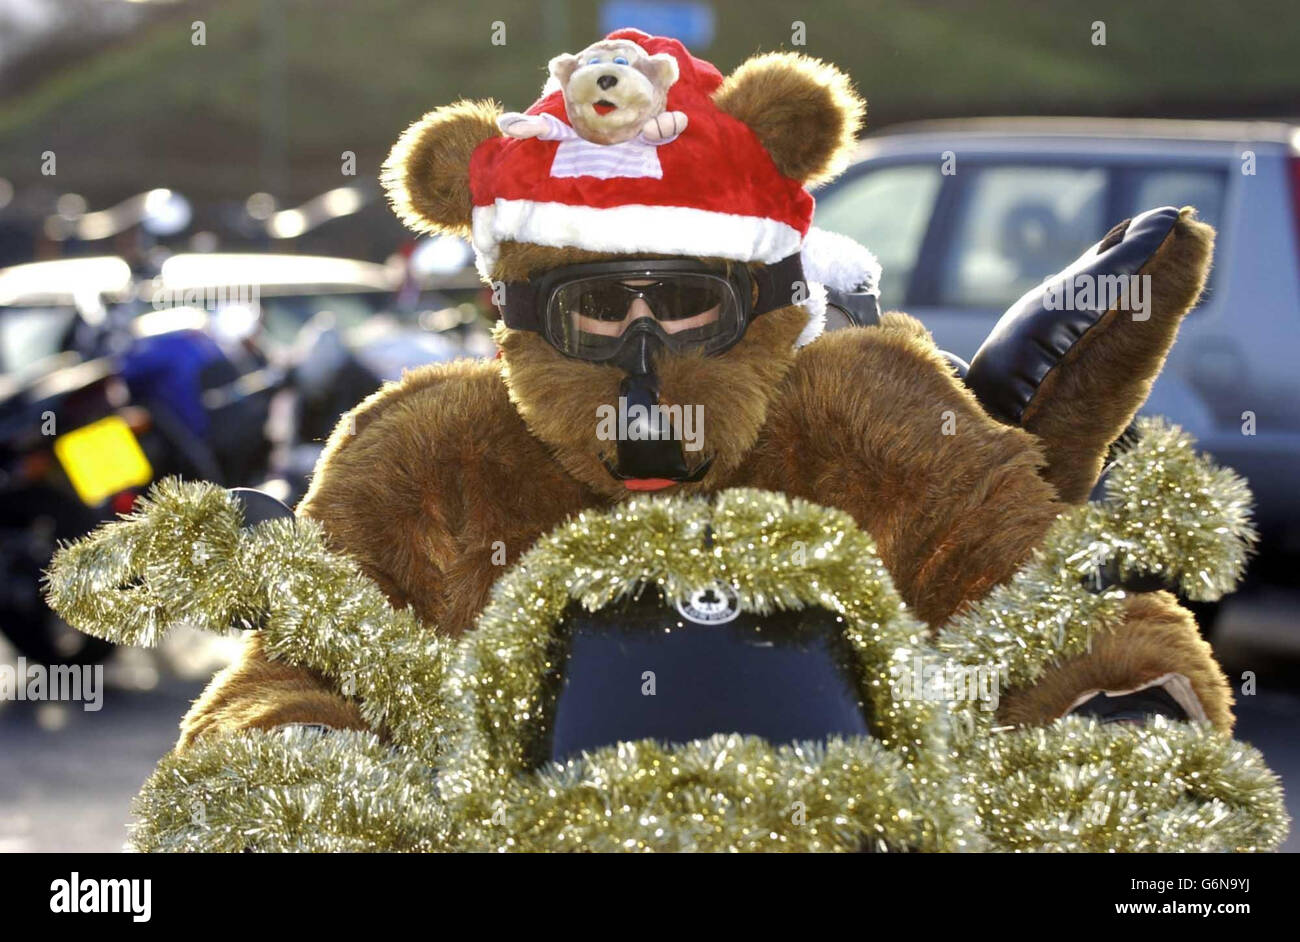 A biker dressed in teddy bear outfit joins over a hundred motorcyclists at the Ace Cafe, Brent, north London, to deliver Christmas presents to children at Central Middlesex Hospital, St Mary's Hospital and St Thomas' Hospital. Stock Photo